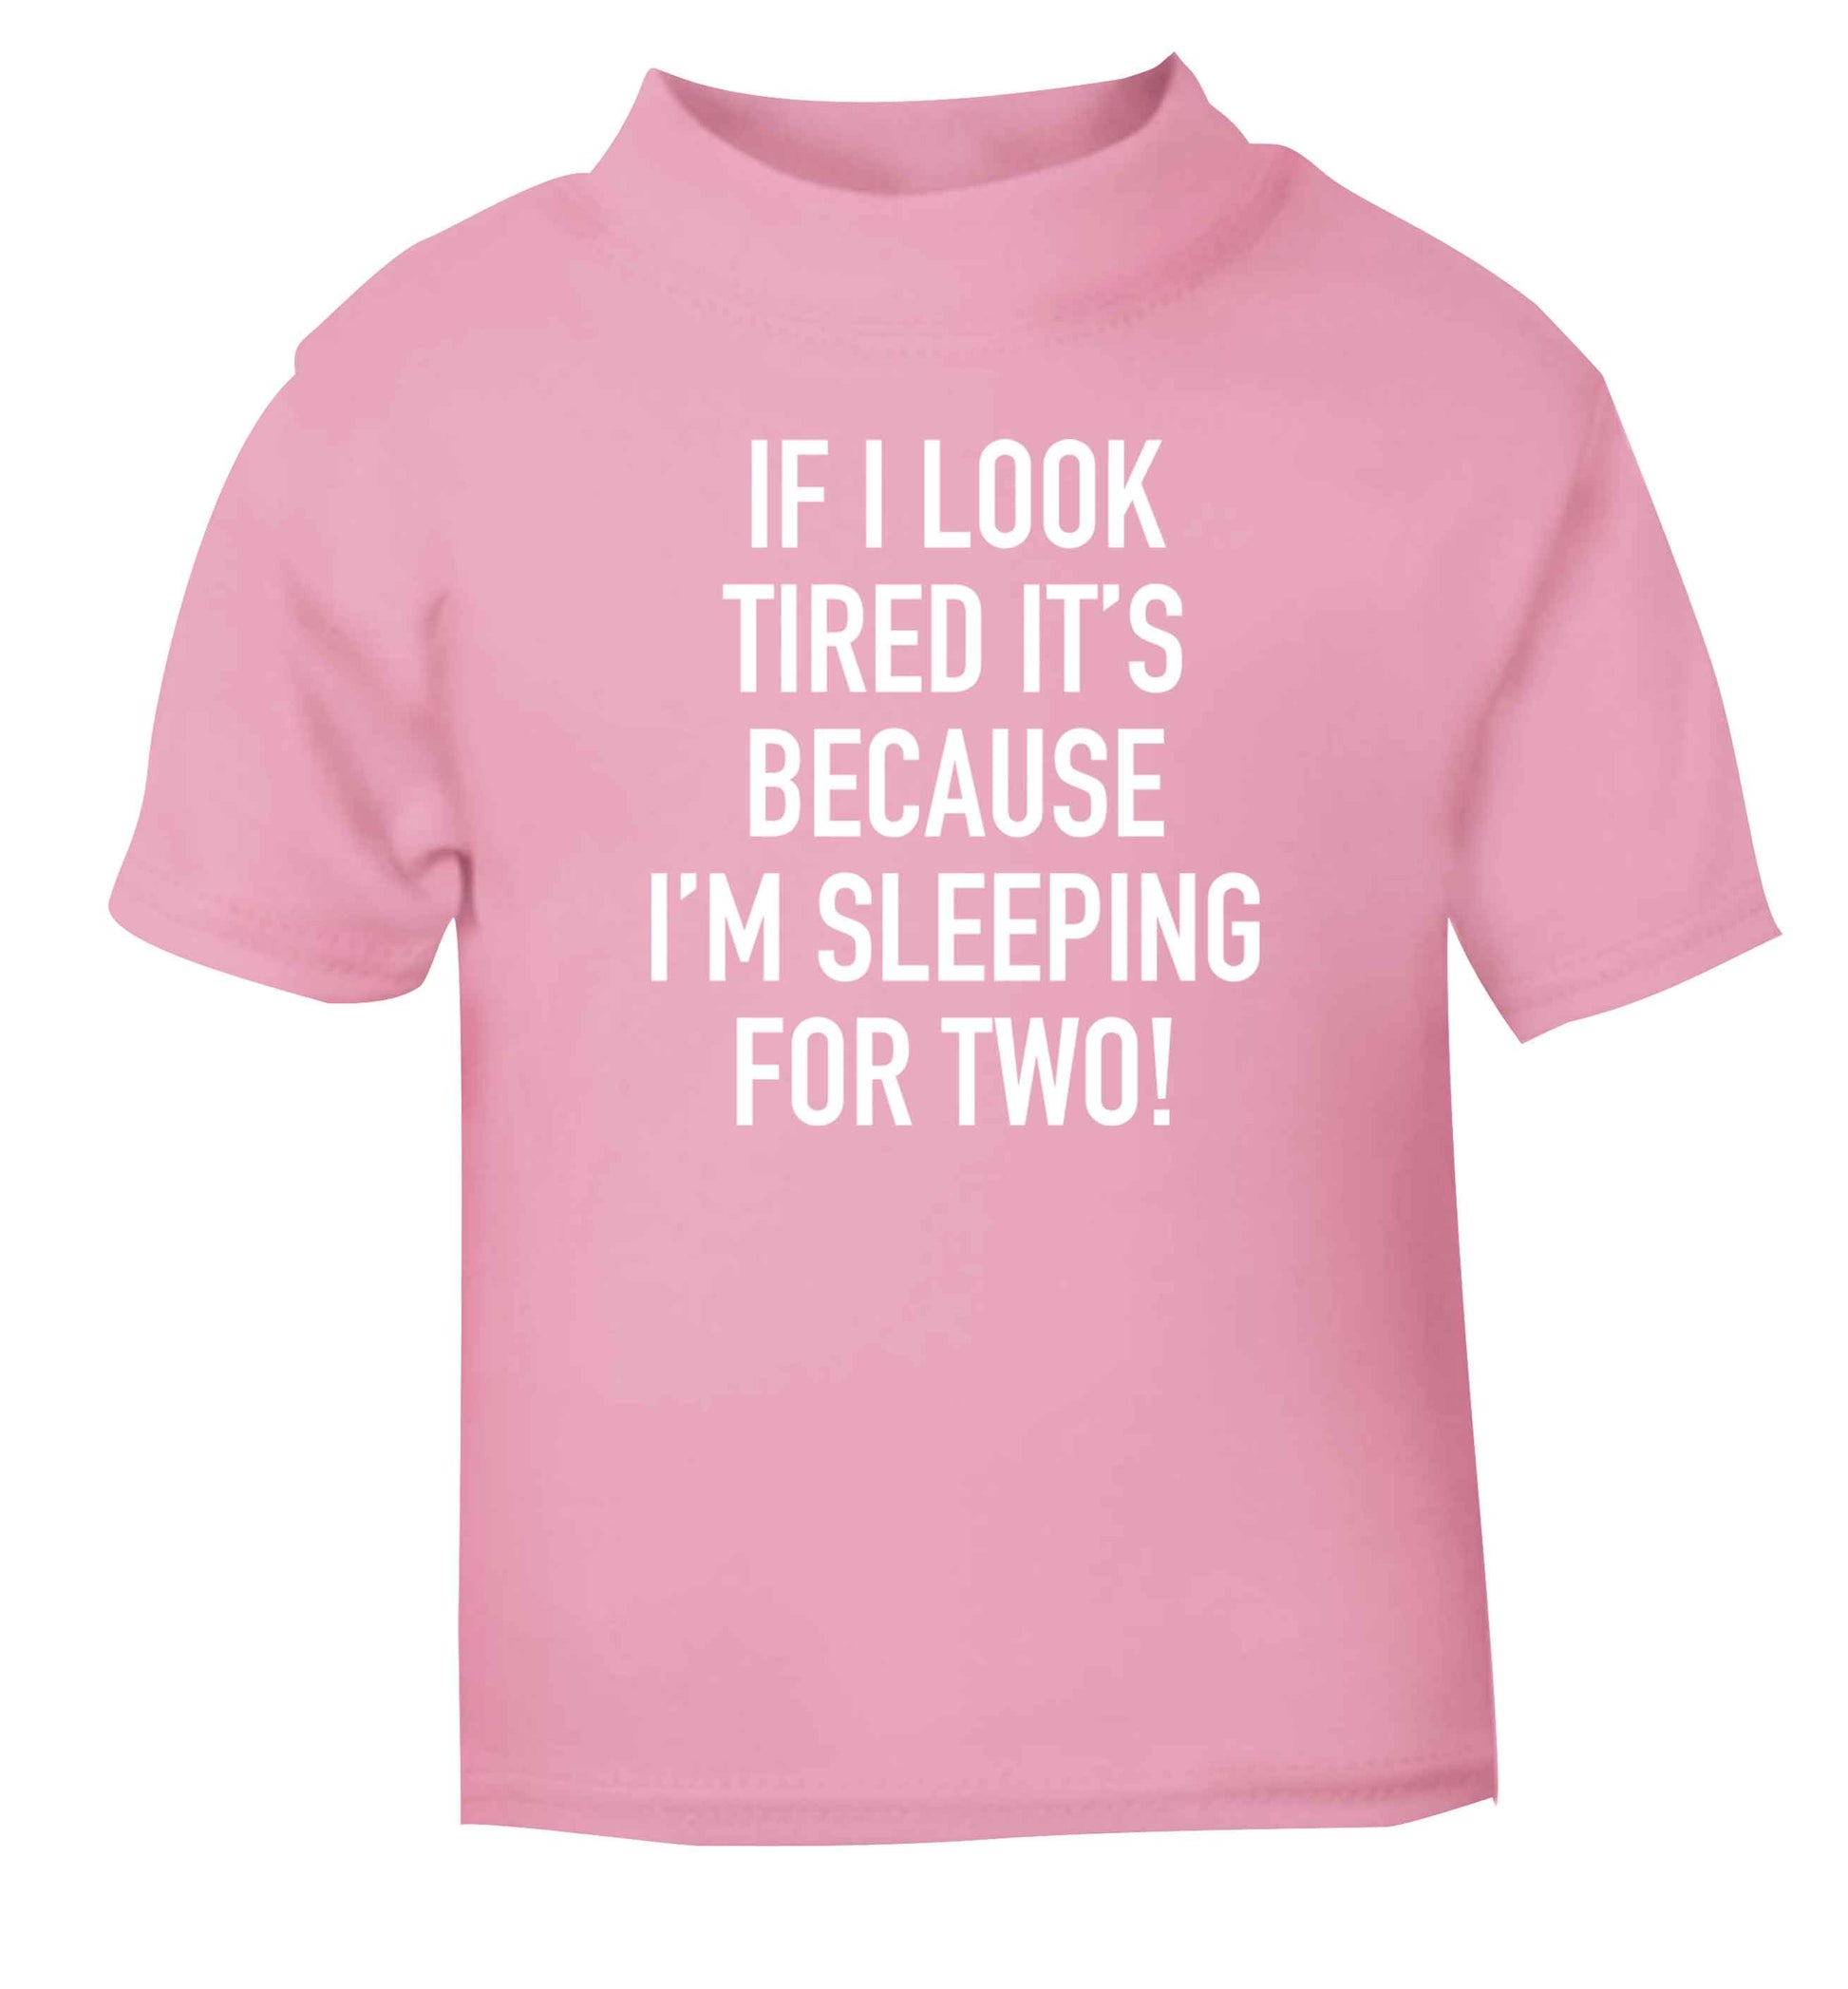 If I look tired it's because I'm sleeping for two light pink Baby Toddler Tshirt 2 Years